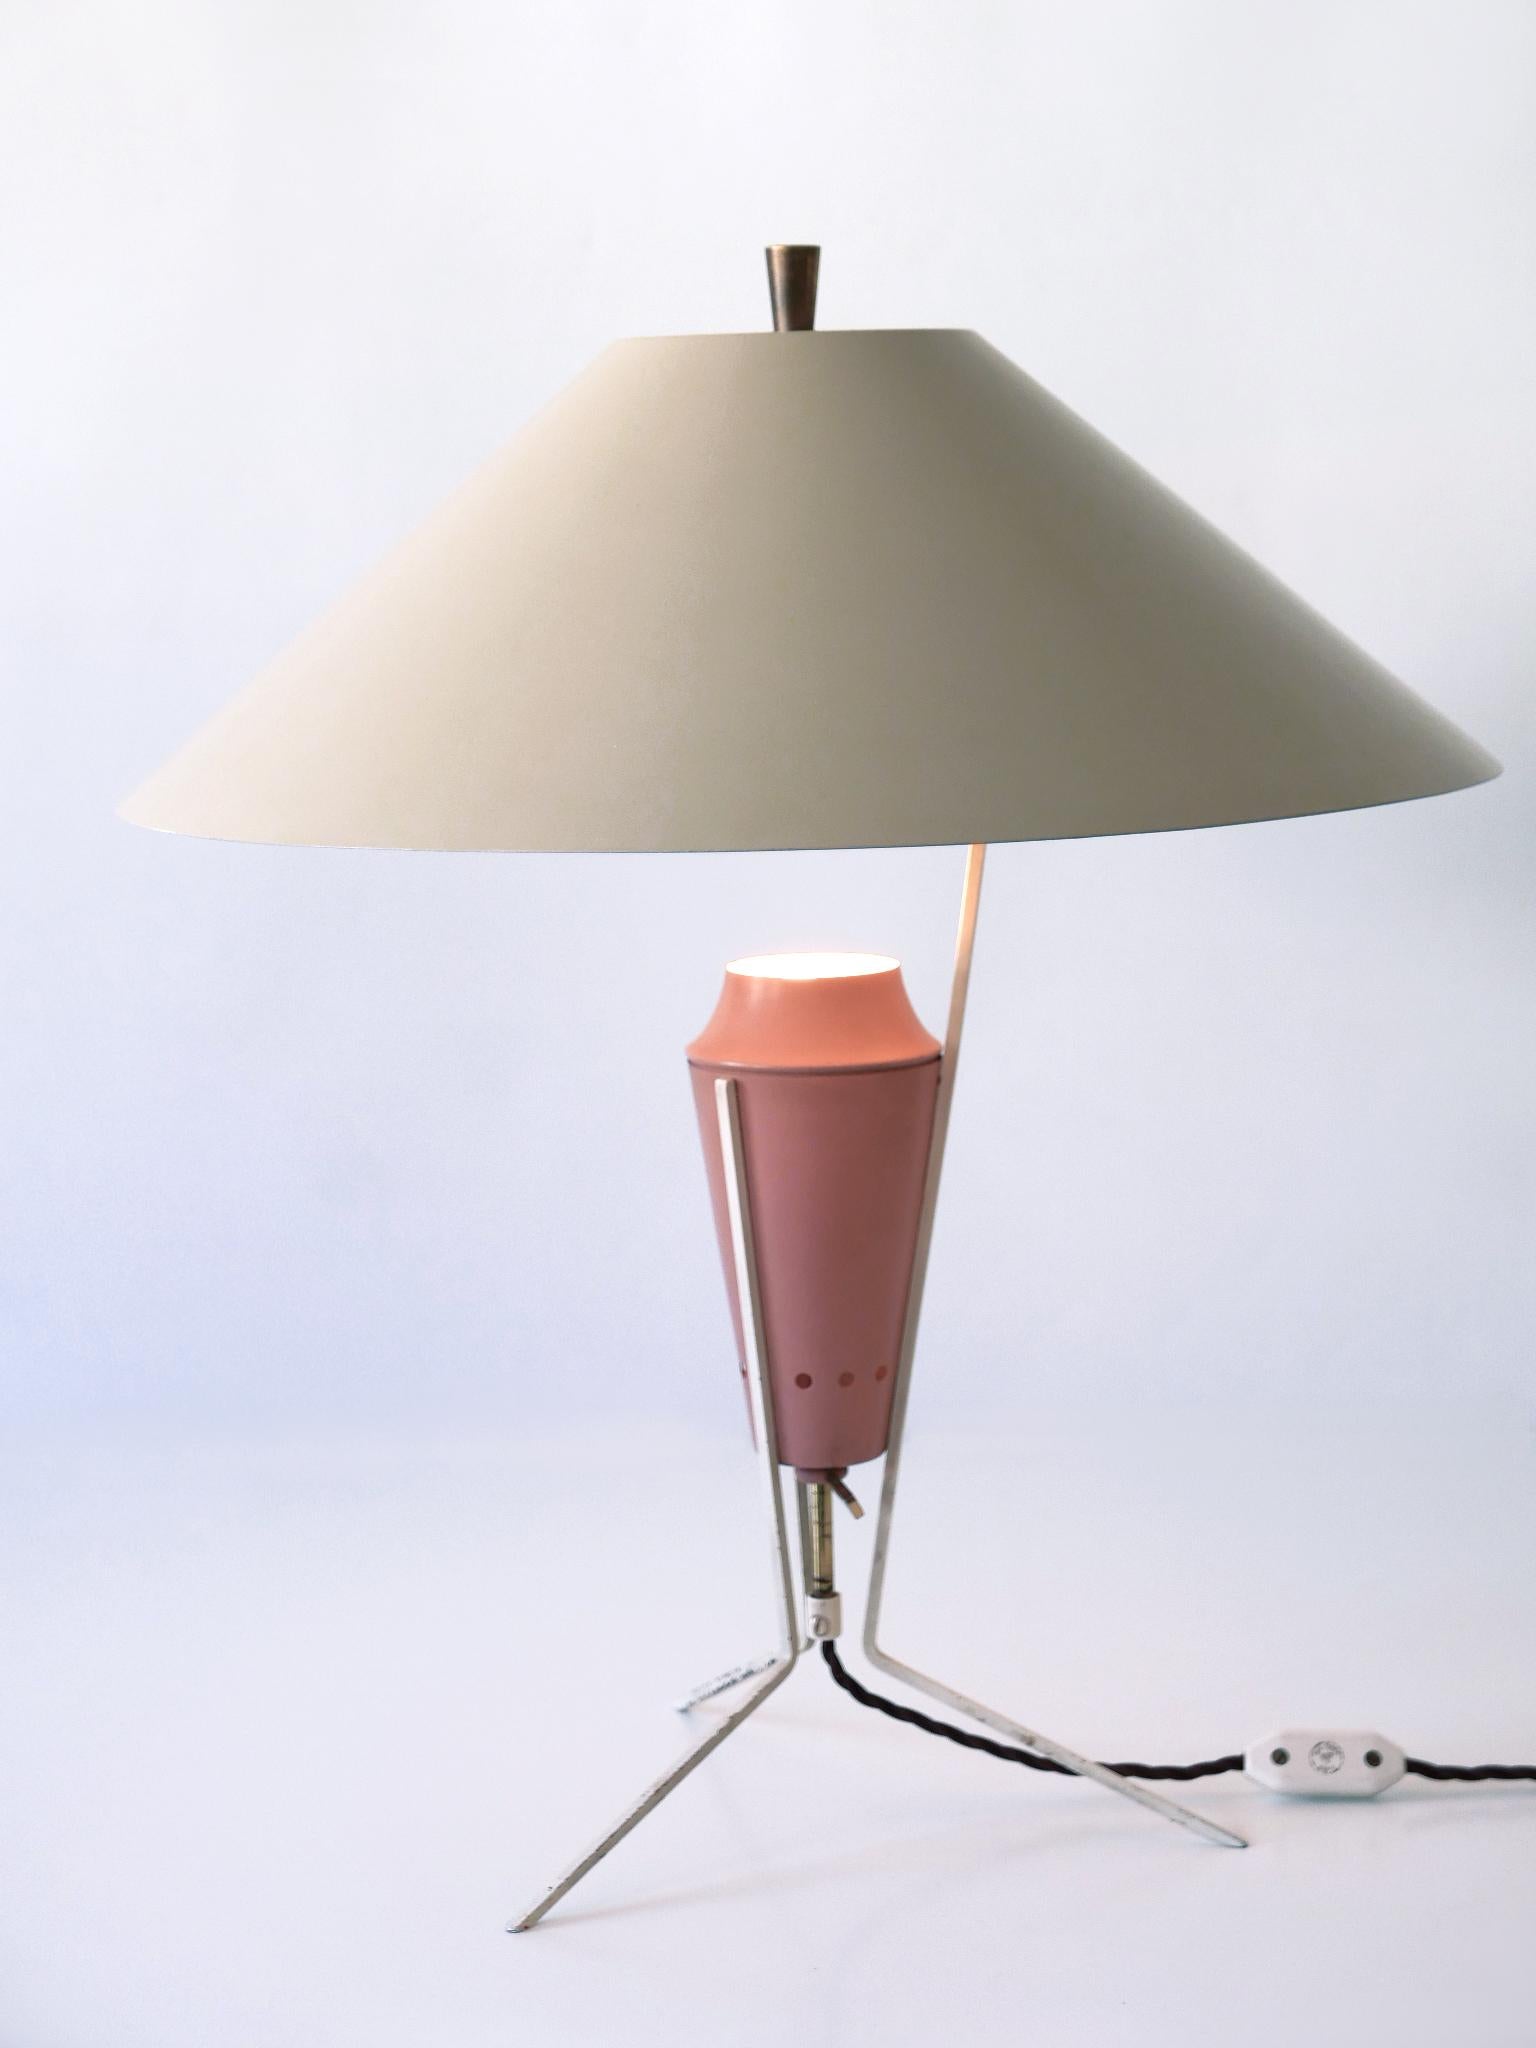 Extremely rare, large and highly decorative Mid-Century Modern table lamp. Designed and manufactured in Germany, 1950s.

This sculptural table lamp is executed in pastel colors enameled metal, aluminium and brass. It comes with an E27 / E26 Edison